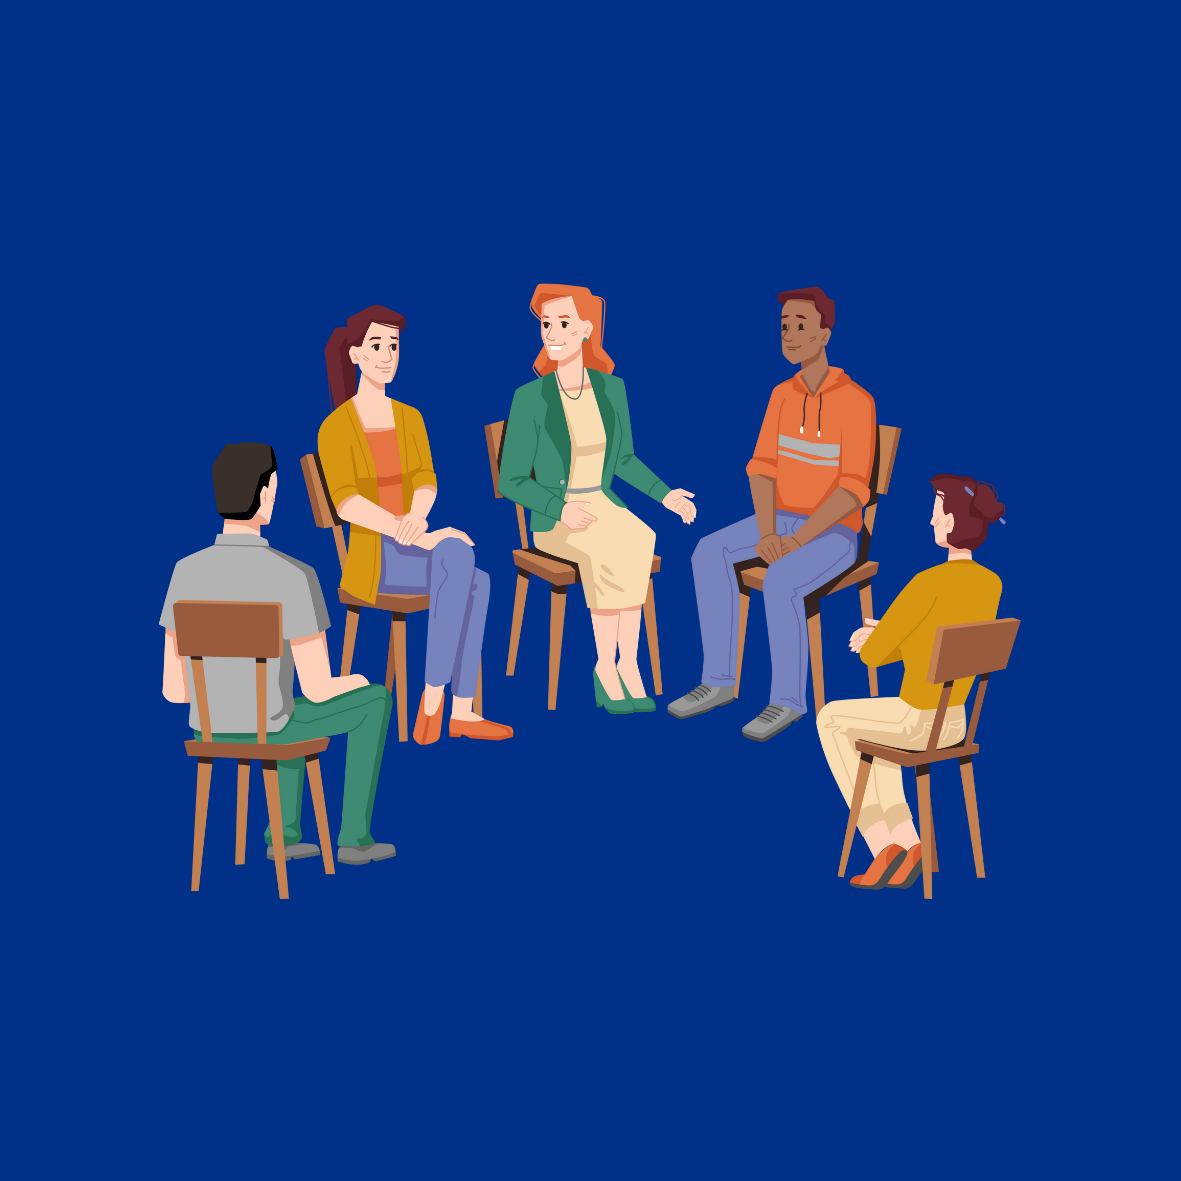 Picture of a Group of People Sat on Chairs Talking